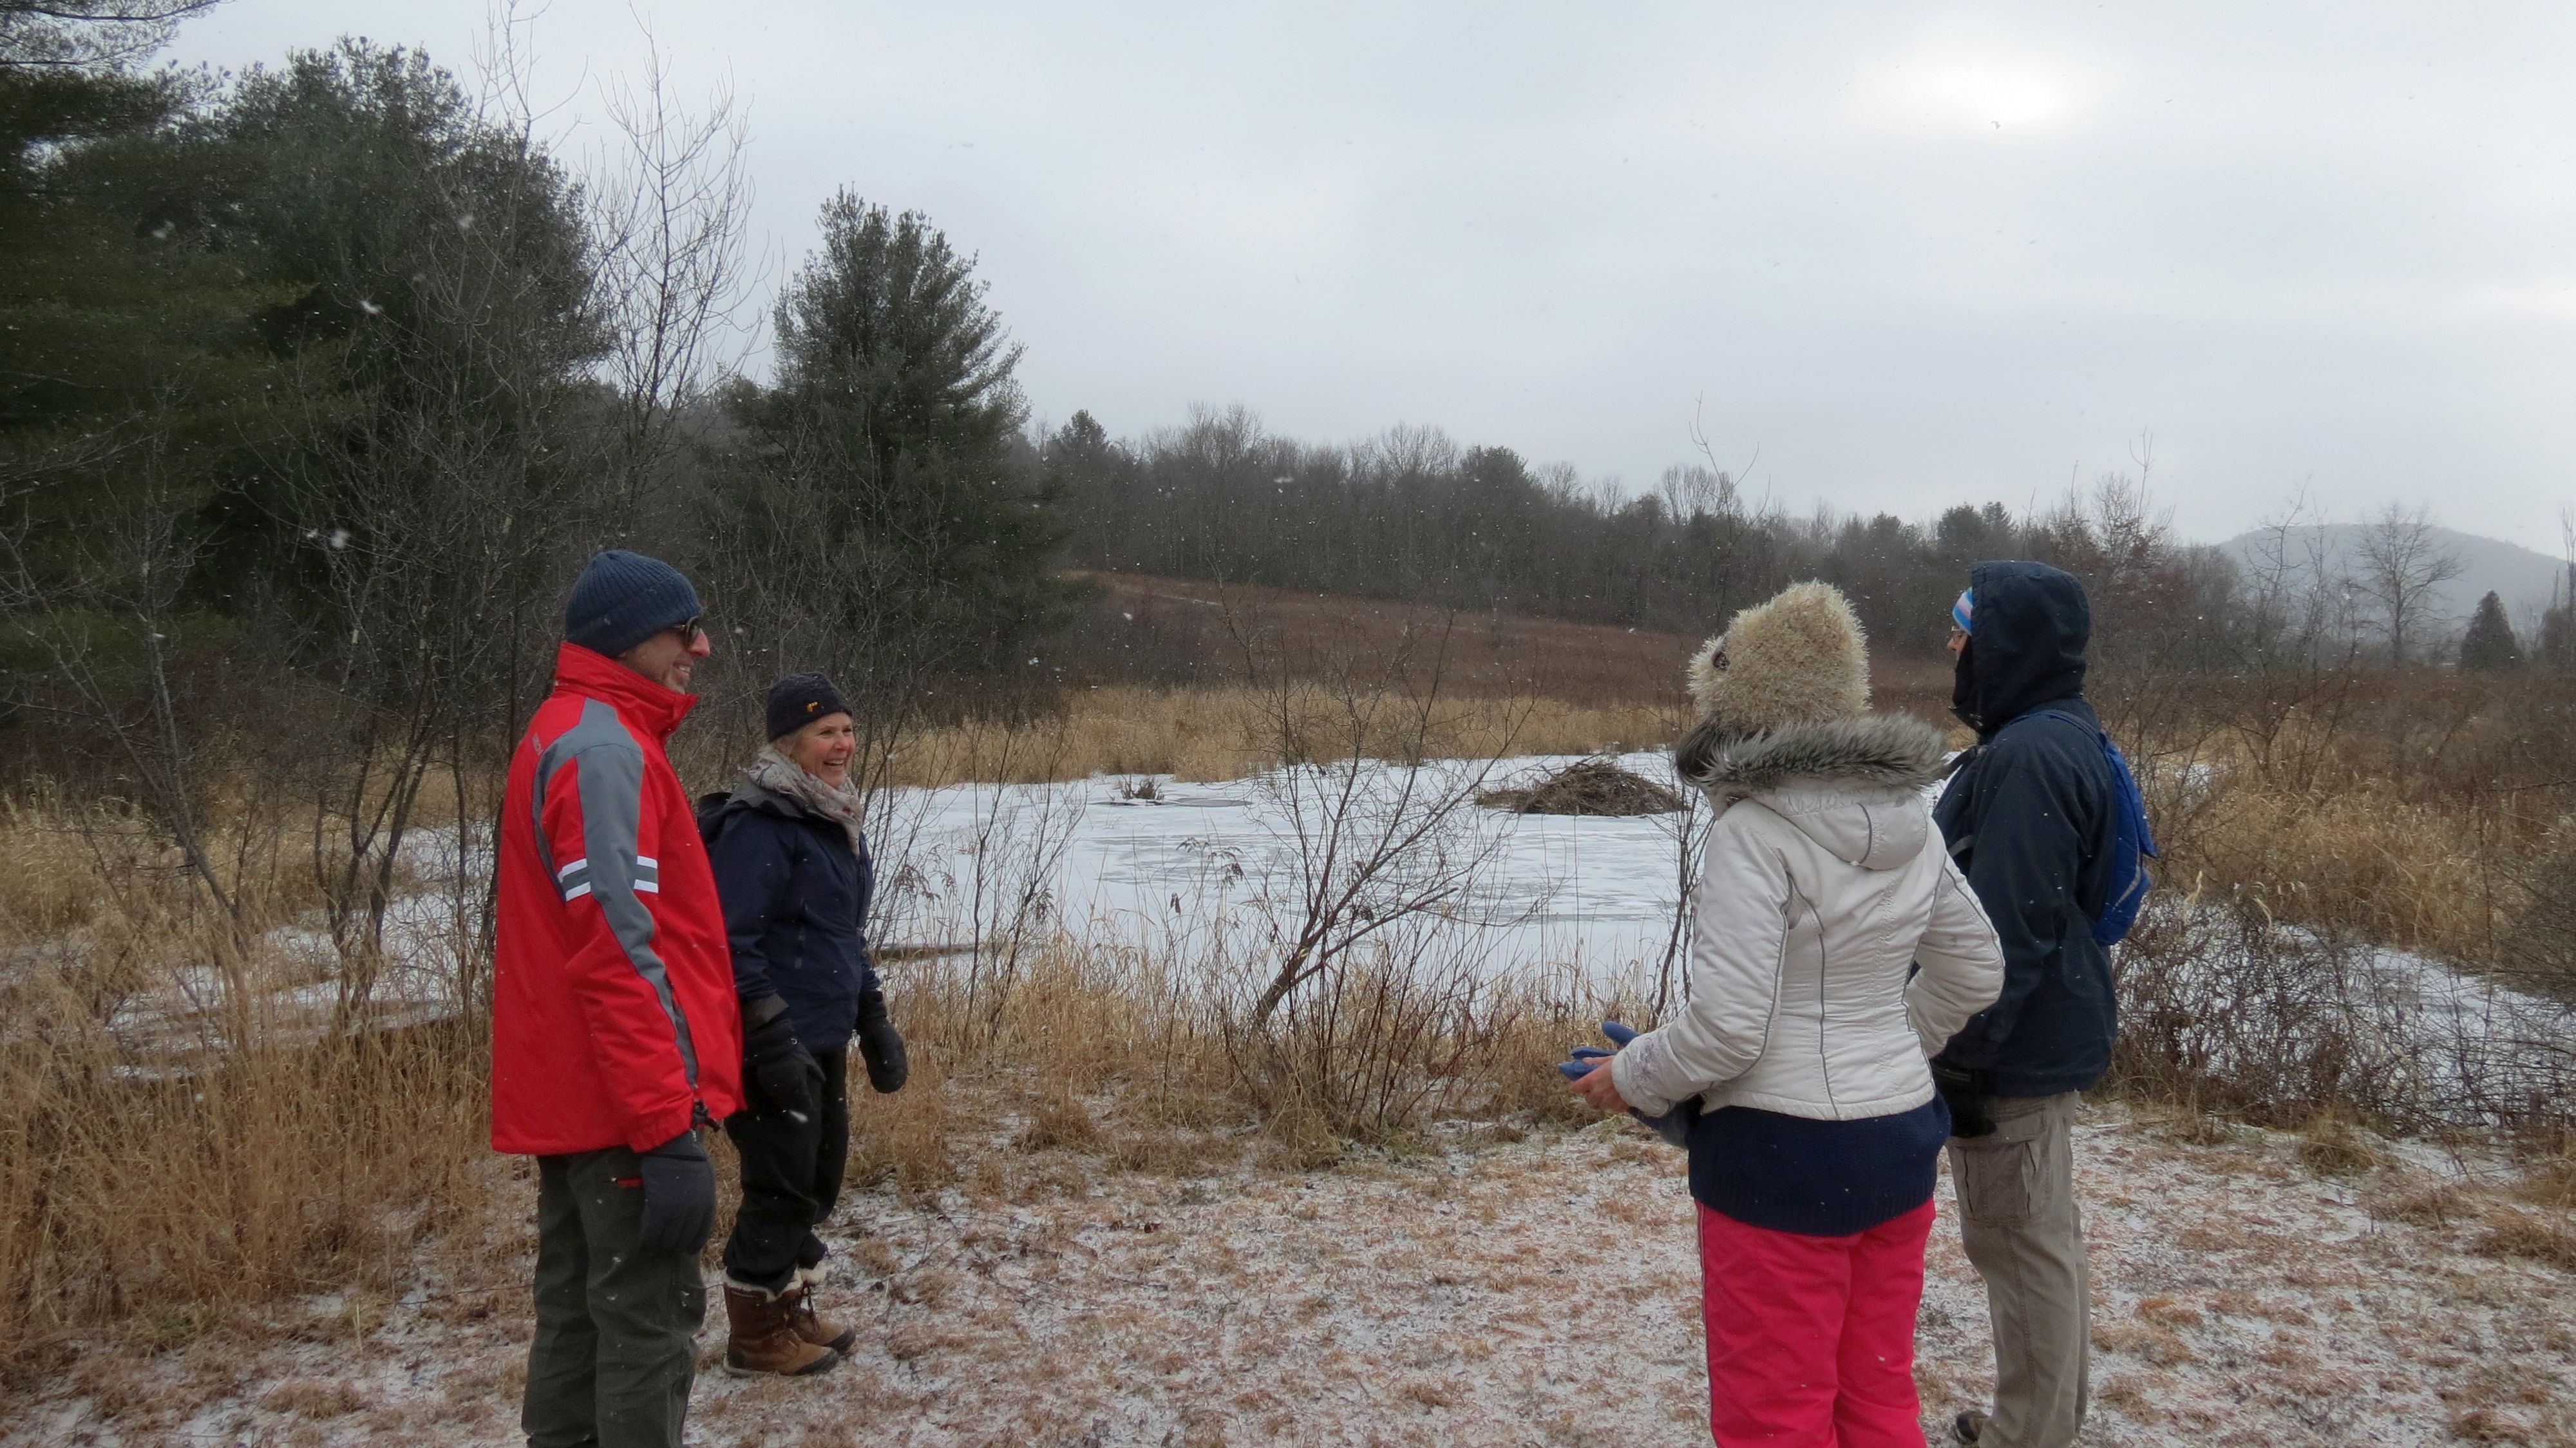 Family friendly winter hike, snowshowing if conditions allow in Great Barrington 